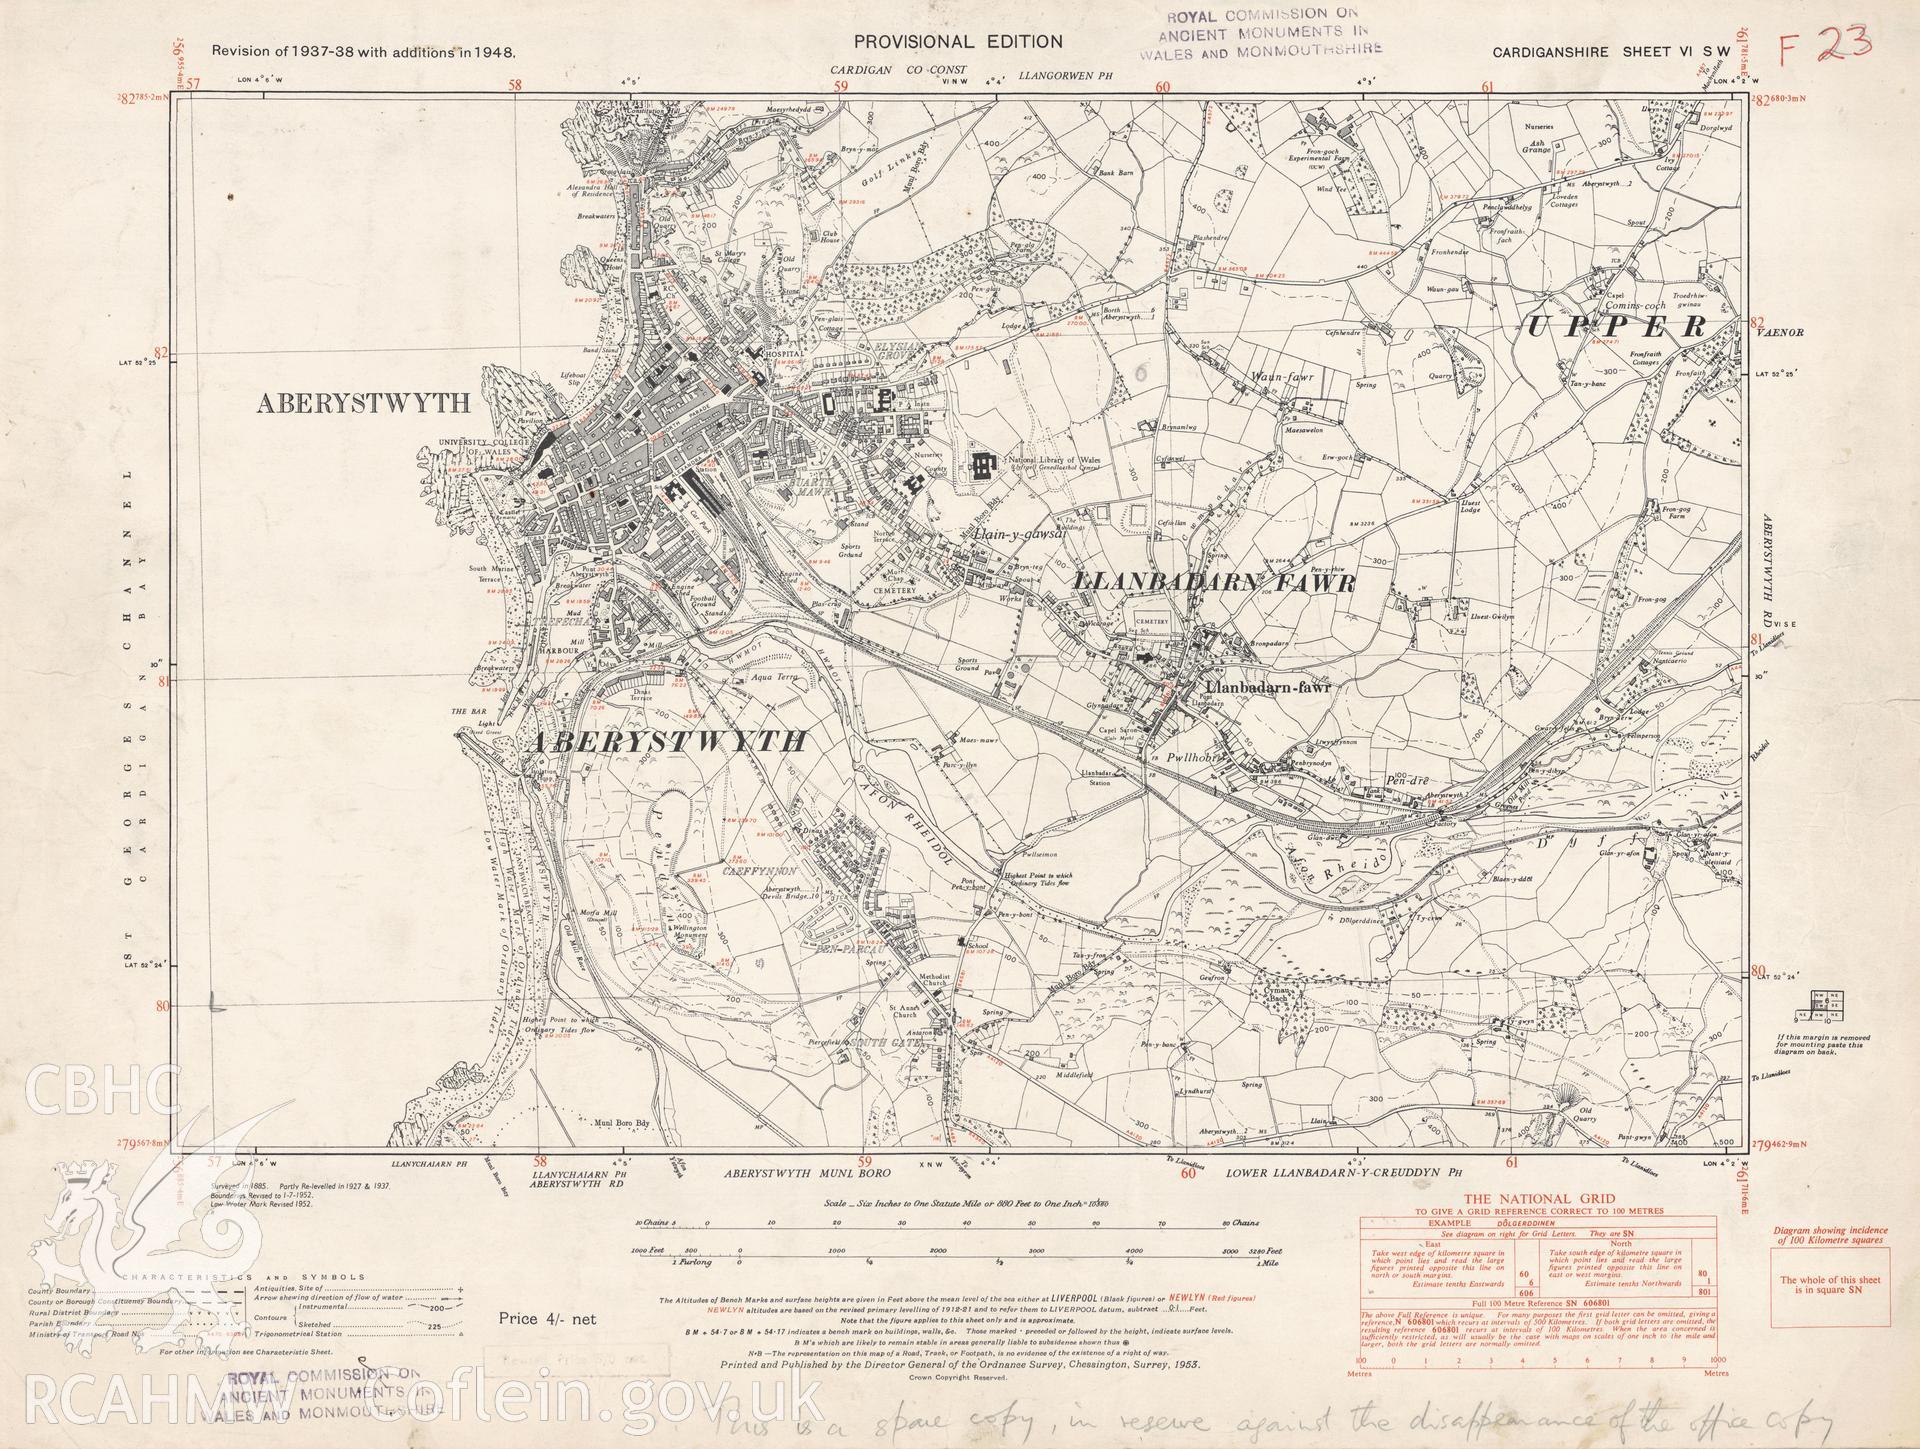 Digital copy of a Provisional Edition Ordnance Survey map. A revision of 1937 map with additions in 1948 covering Aberystwyth Town.